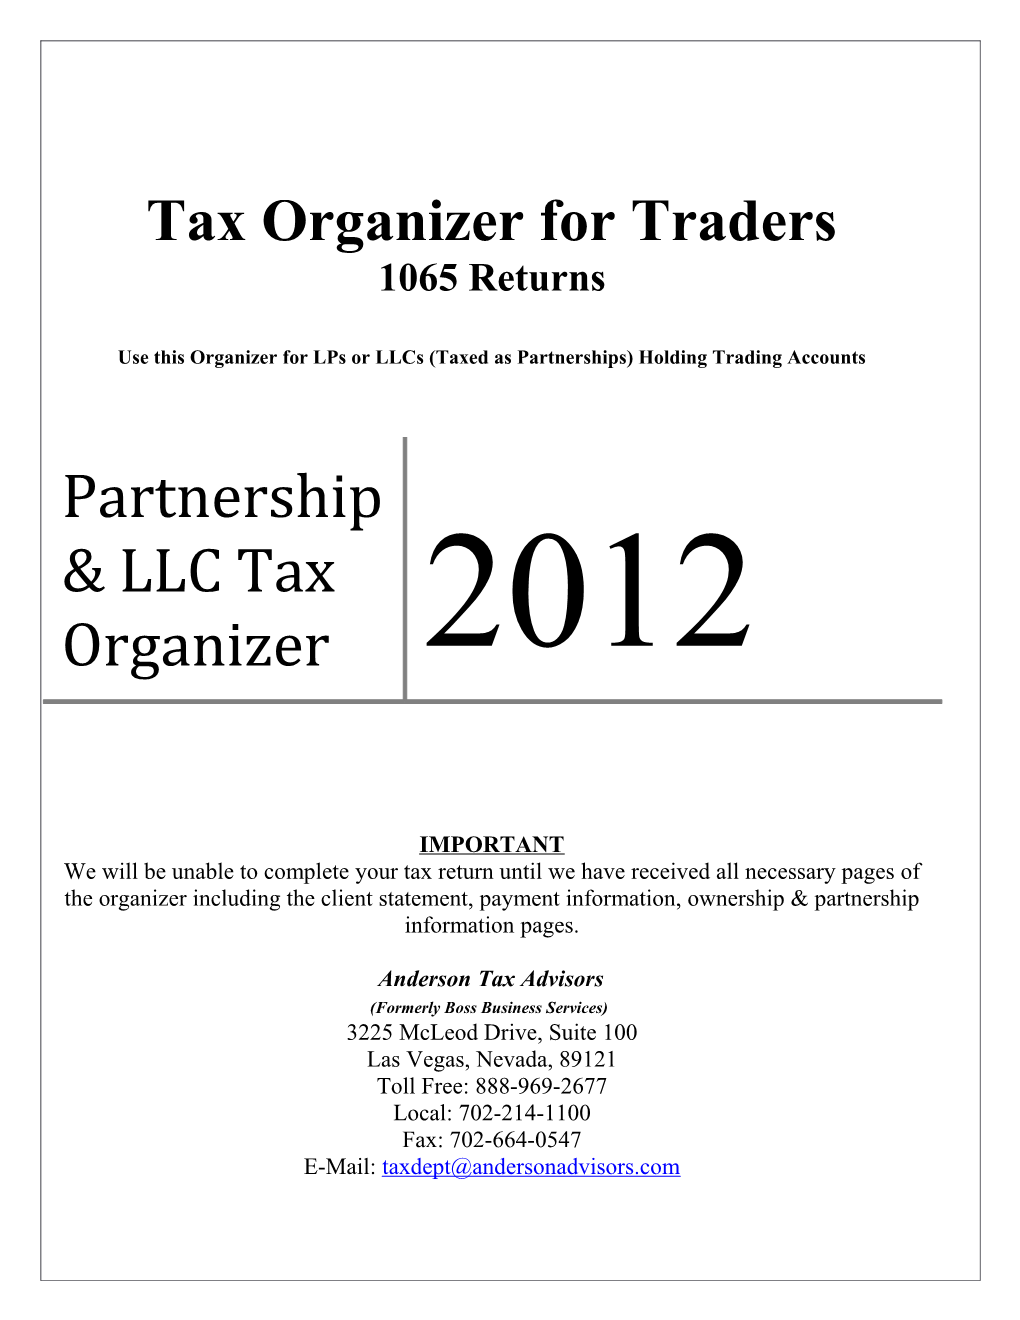 Tax Organizer for Traders